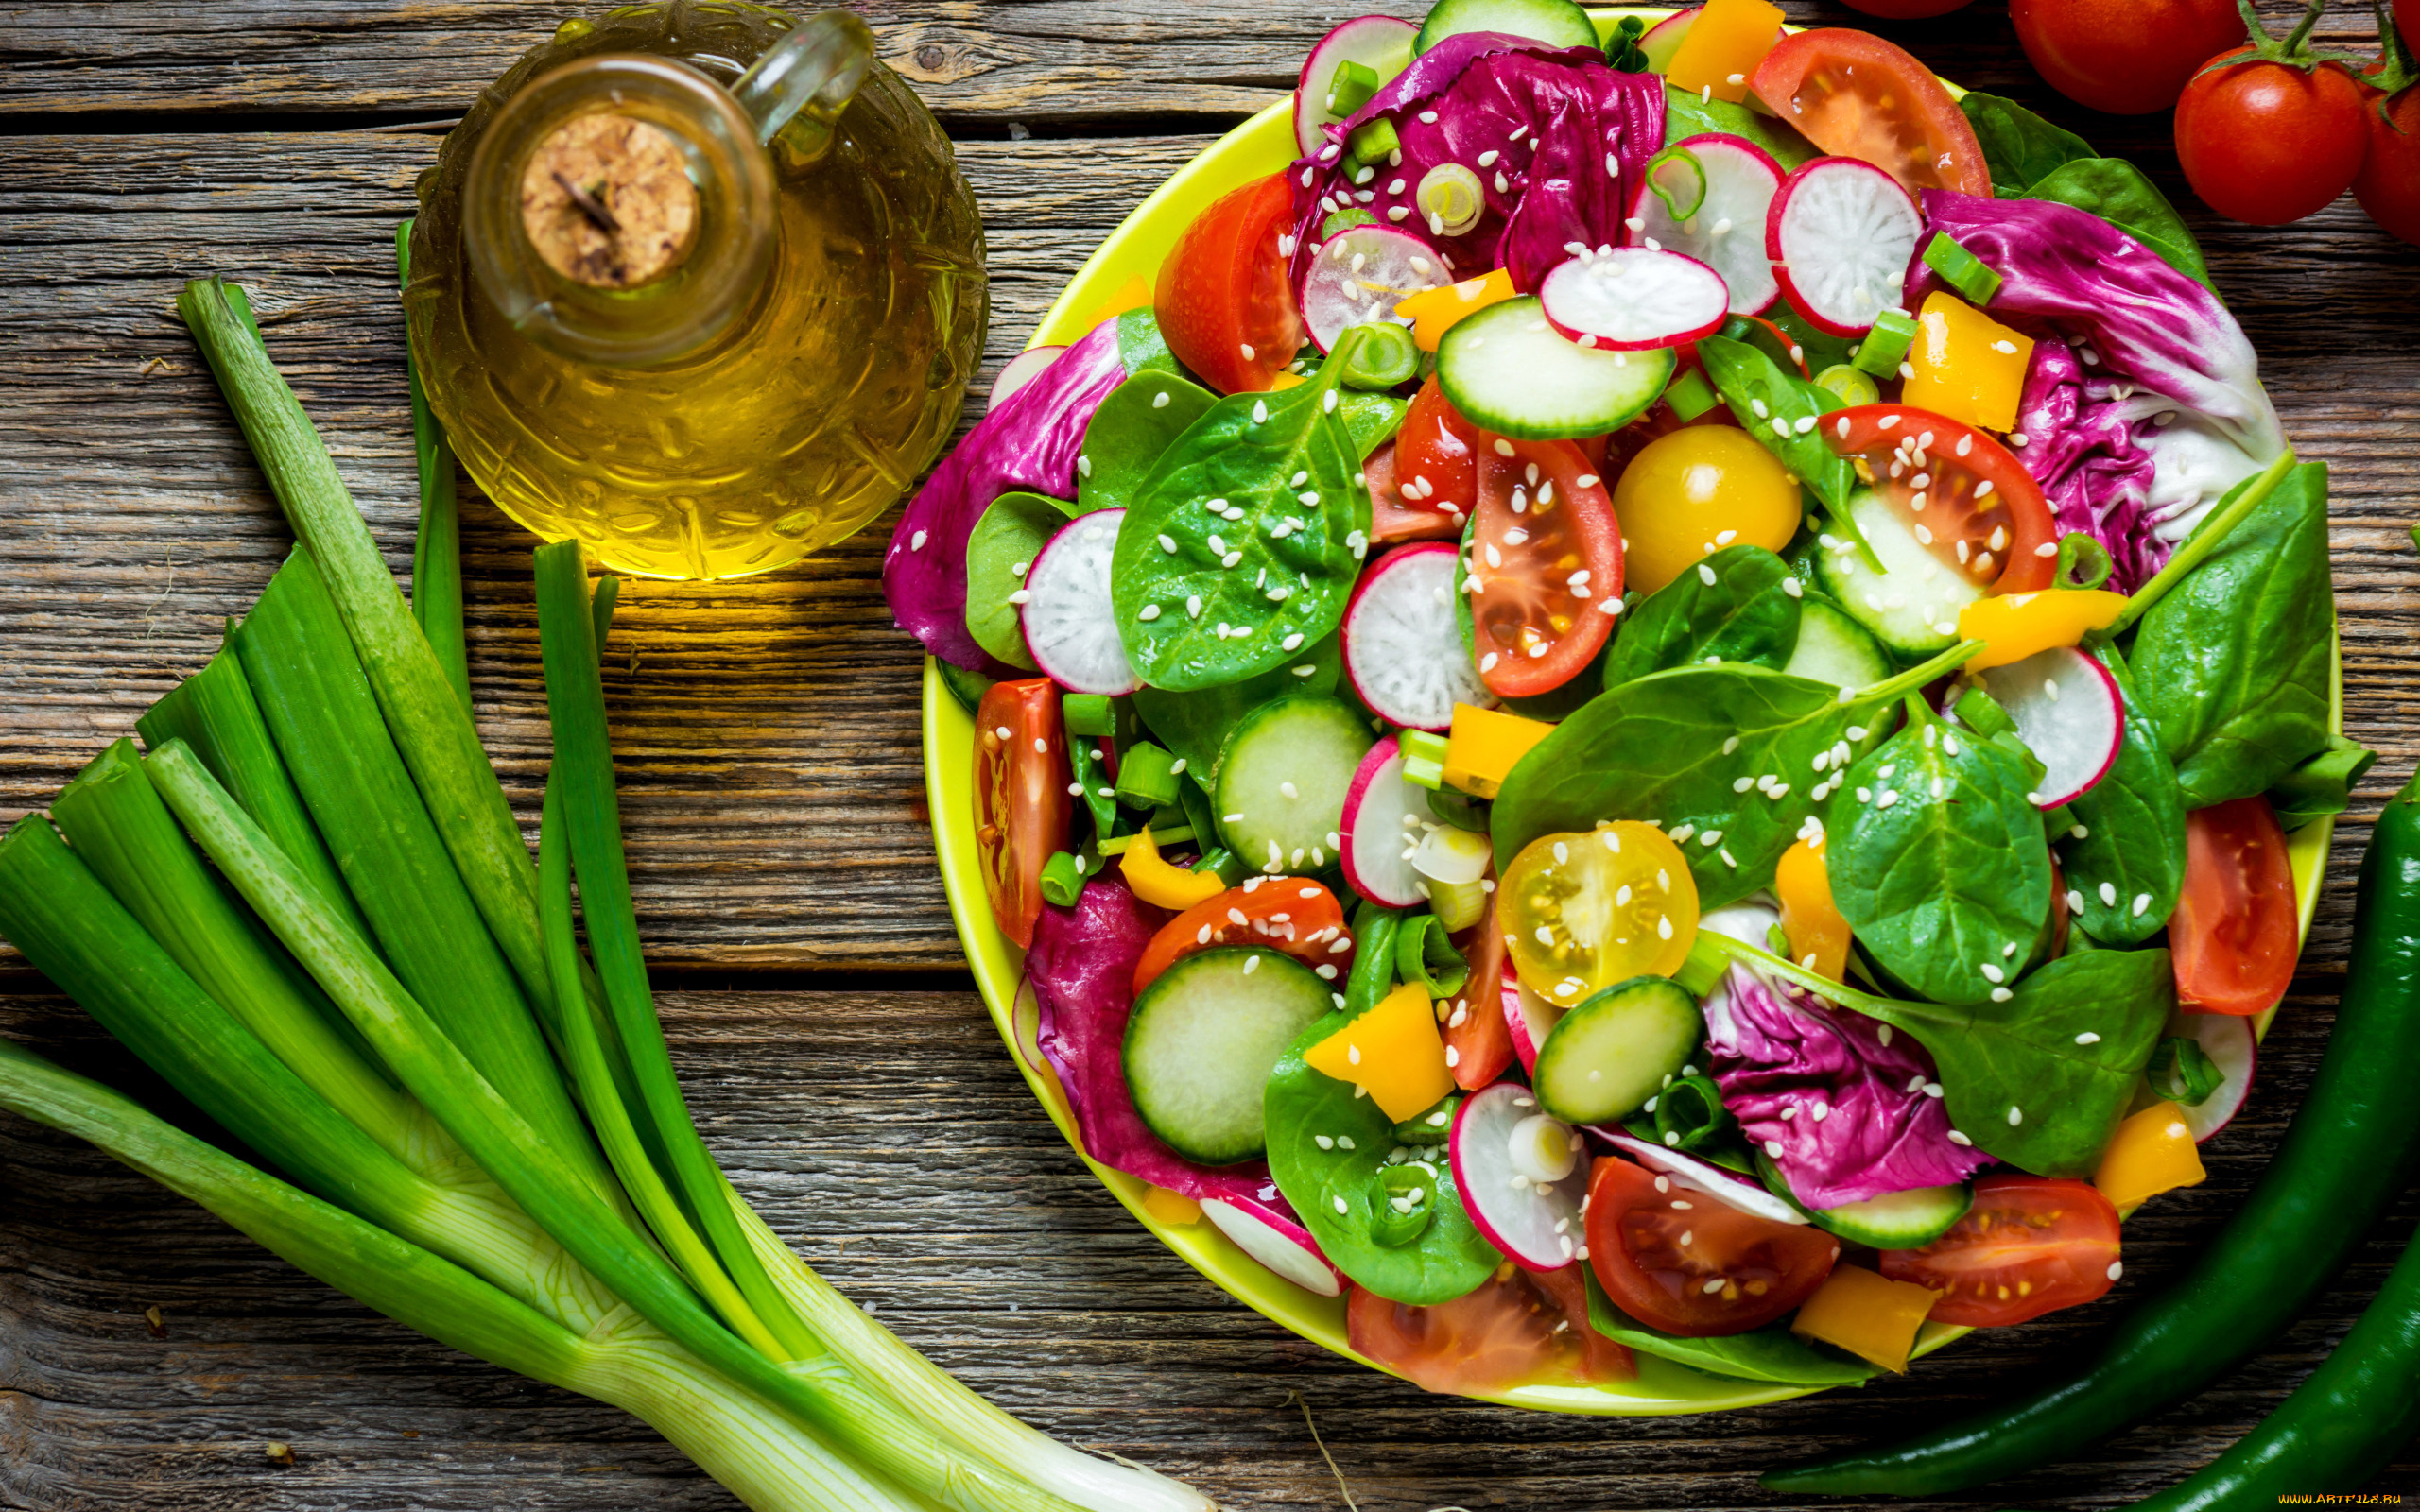 General 2560x1600 food colorful salad vegetables olive oil radish lettuce seeds wooden surface cucumbers watermarked closeup